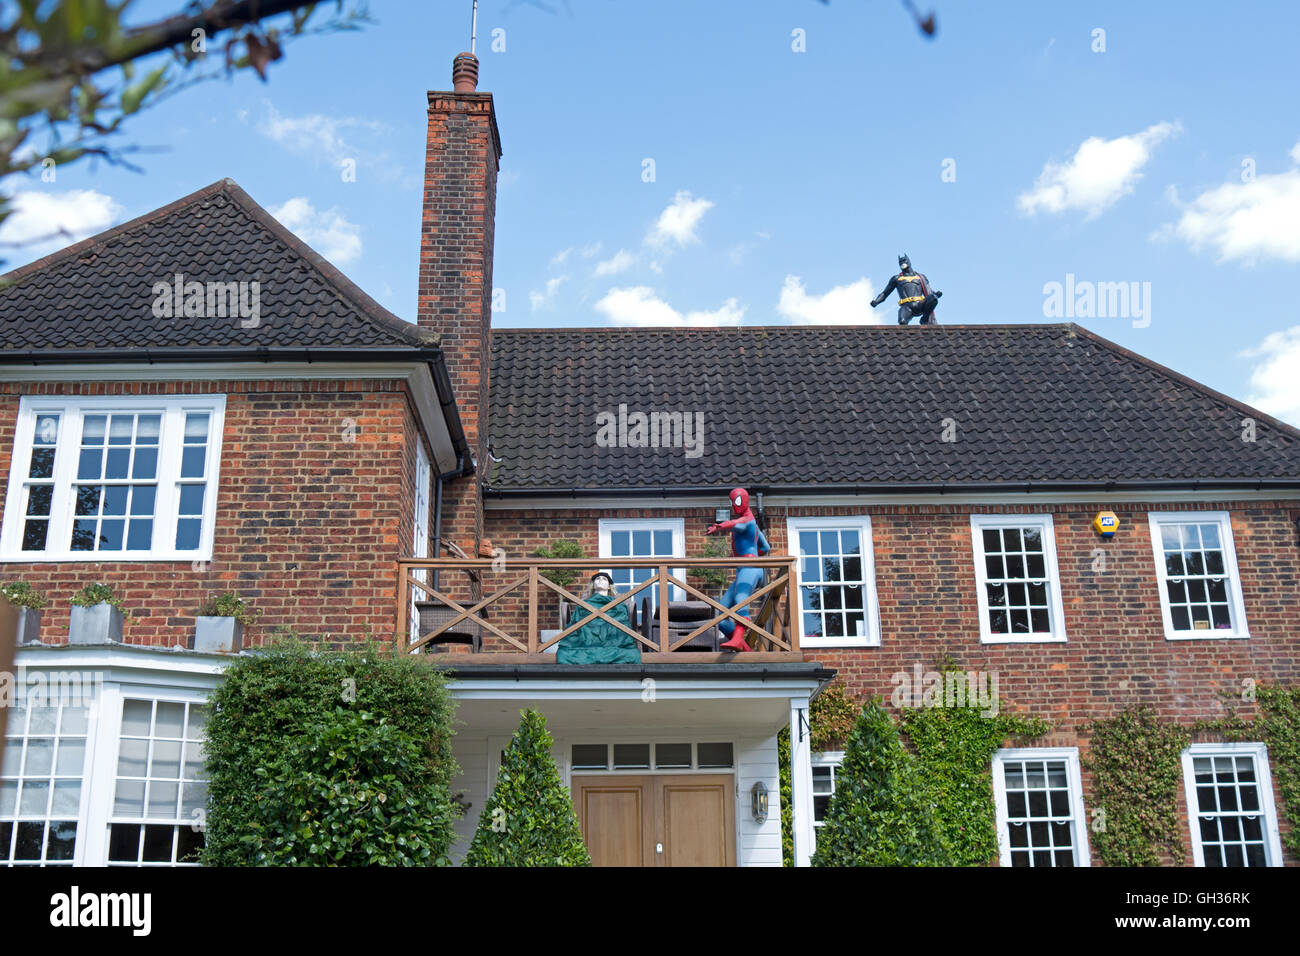 Life-size models of Batman and Spider-Man adorn a house in Hampstead Stock Photo